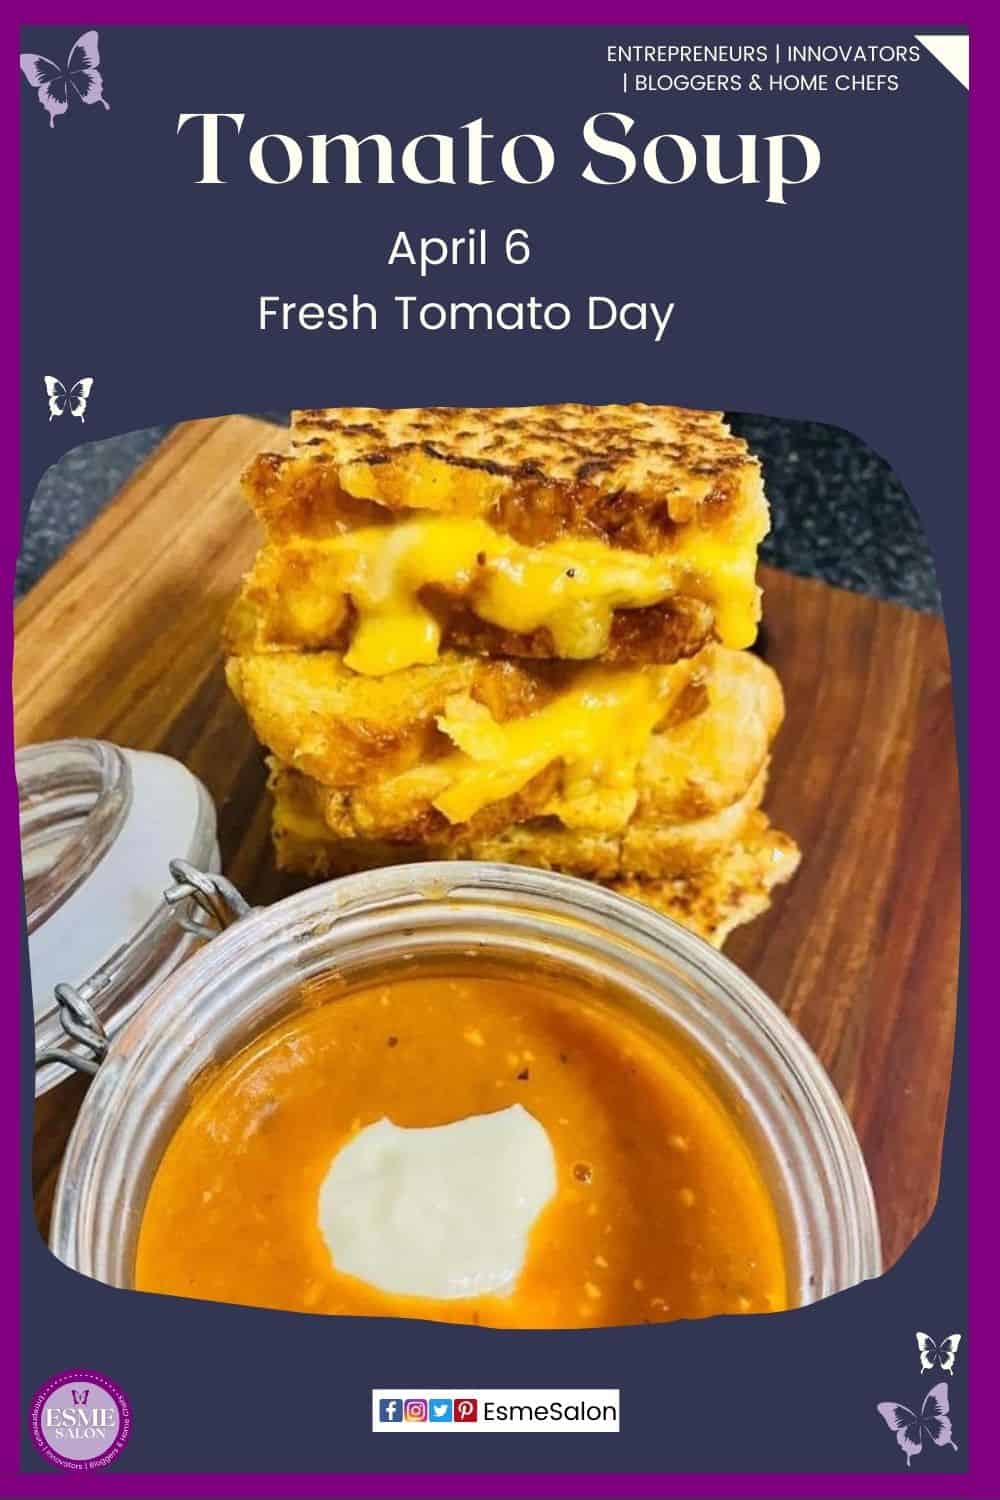 an image of a bowl of fresh tomato soup with a dollop of cream and toasted cheese sandwiches on the side